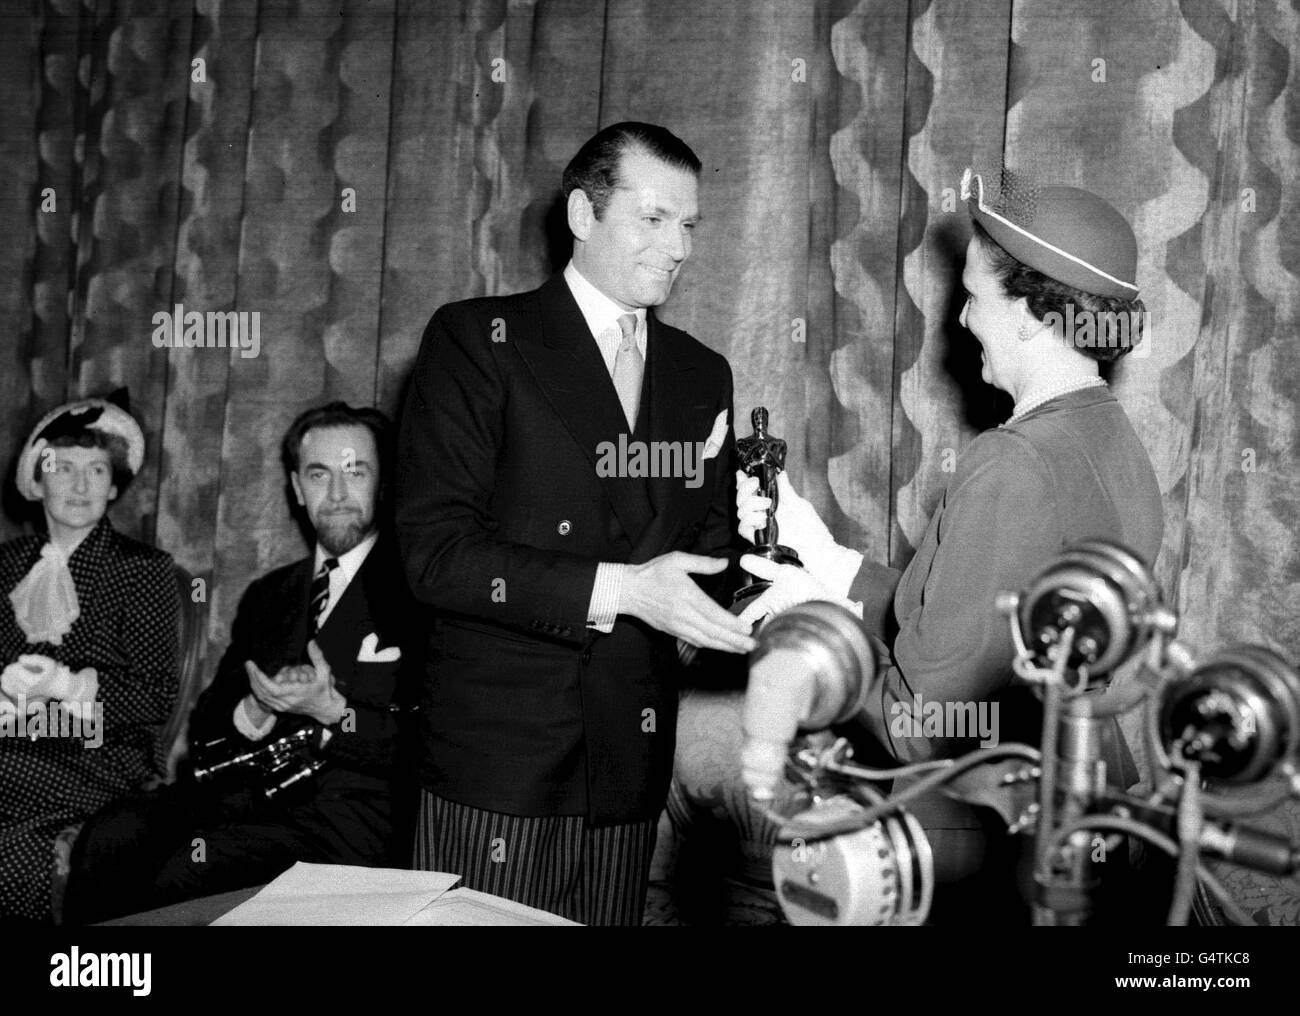 Mrs. Lewis Douglas, wife of U.S. Ambassador presenting Sir Laurence Olivier with an American Academy Film Awards 'Oscar' for Hamlet at the Odeon Theatre, London. Sir Lawrence Oliver received three awards for Hamlet, Best Film, and Best Actor Oscars from the American Academy and thenewly-created Best Film British Academy Award. Stock Photo